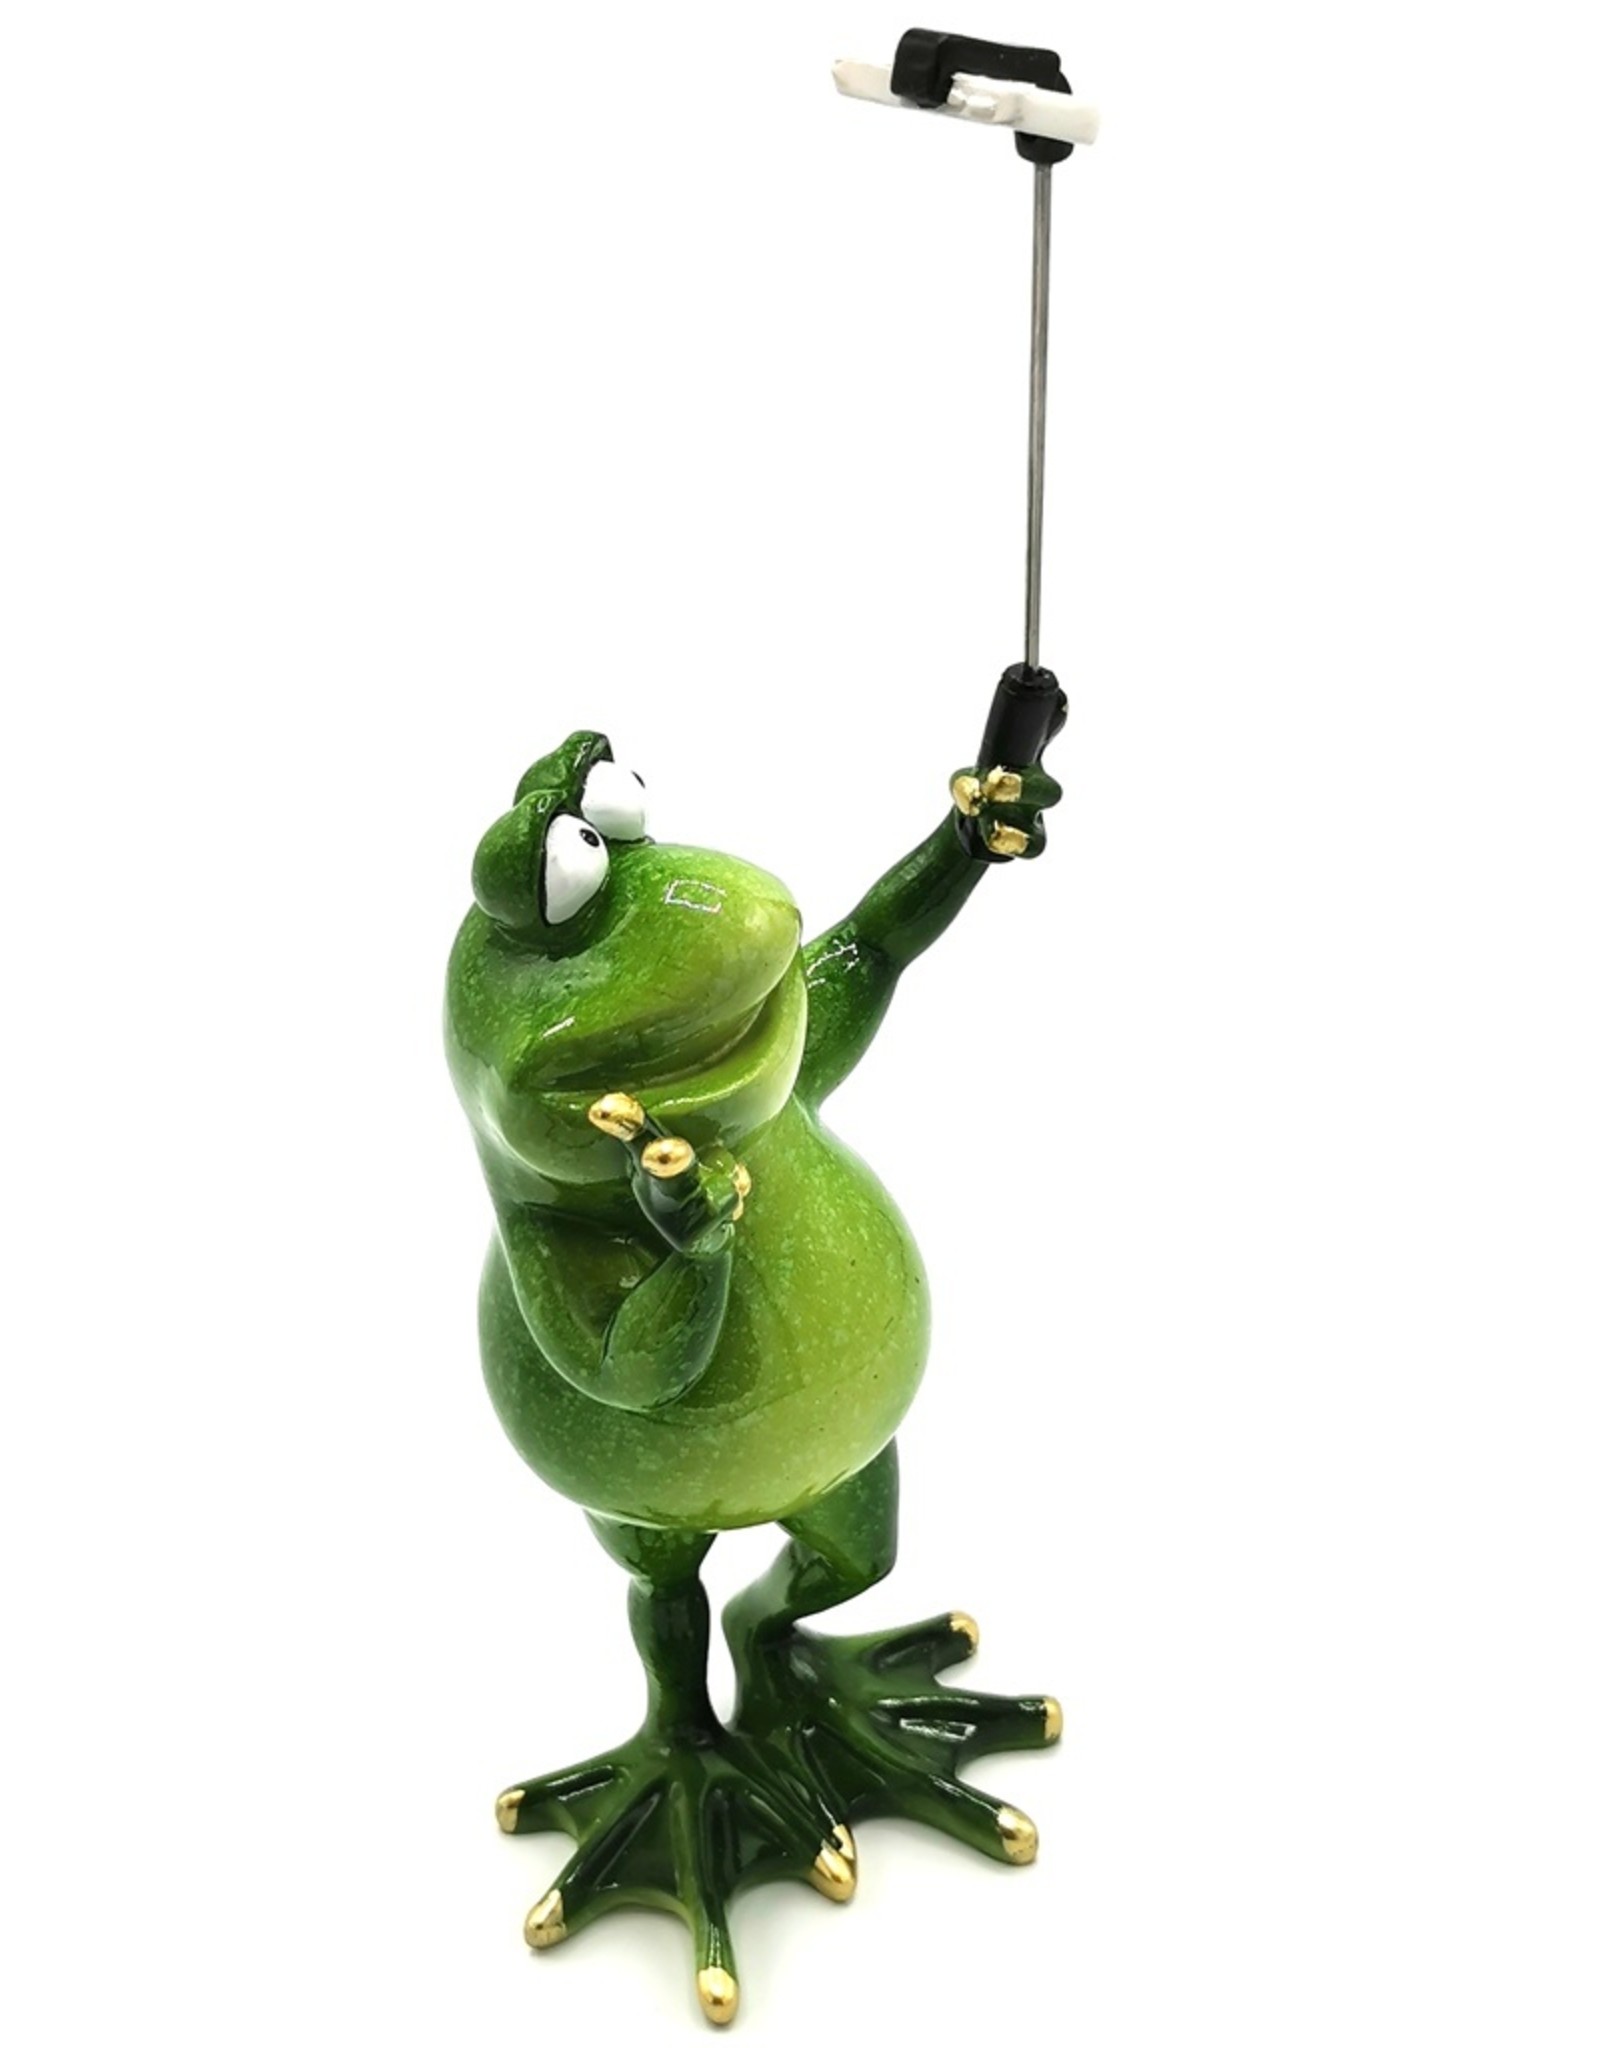 Goldbach Giftware Figurines Collectables - Frog with selfie stick figurine - 28cm, polyresin